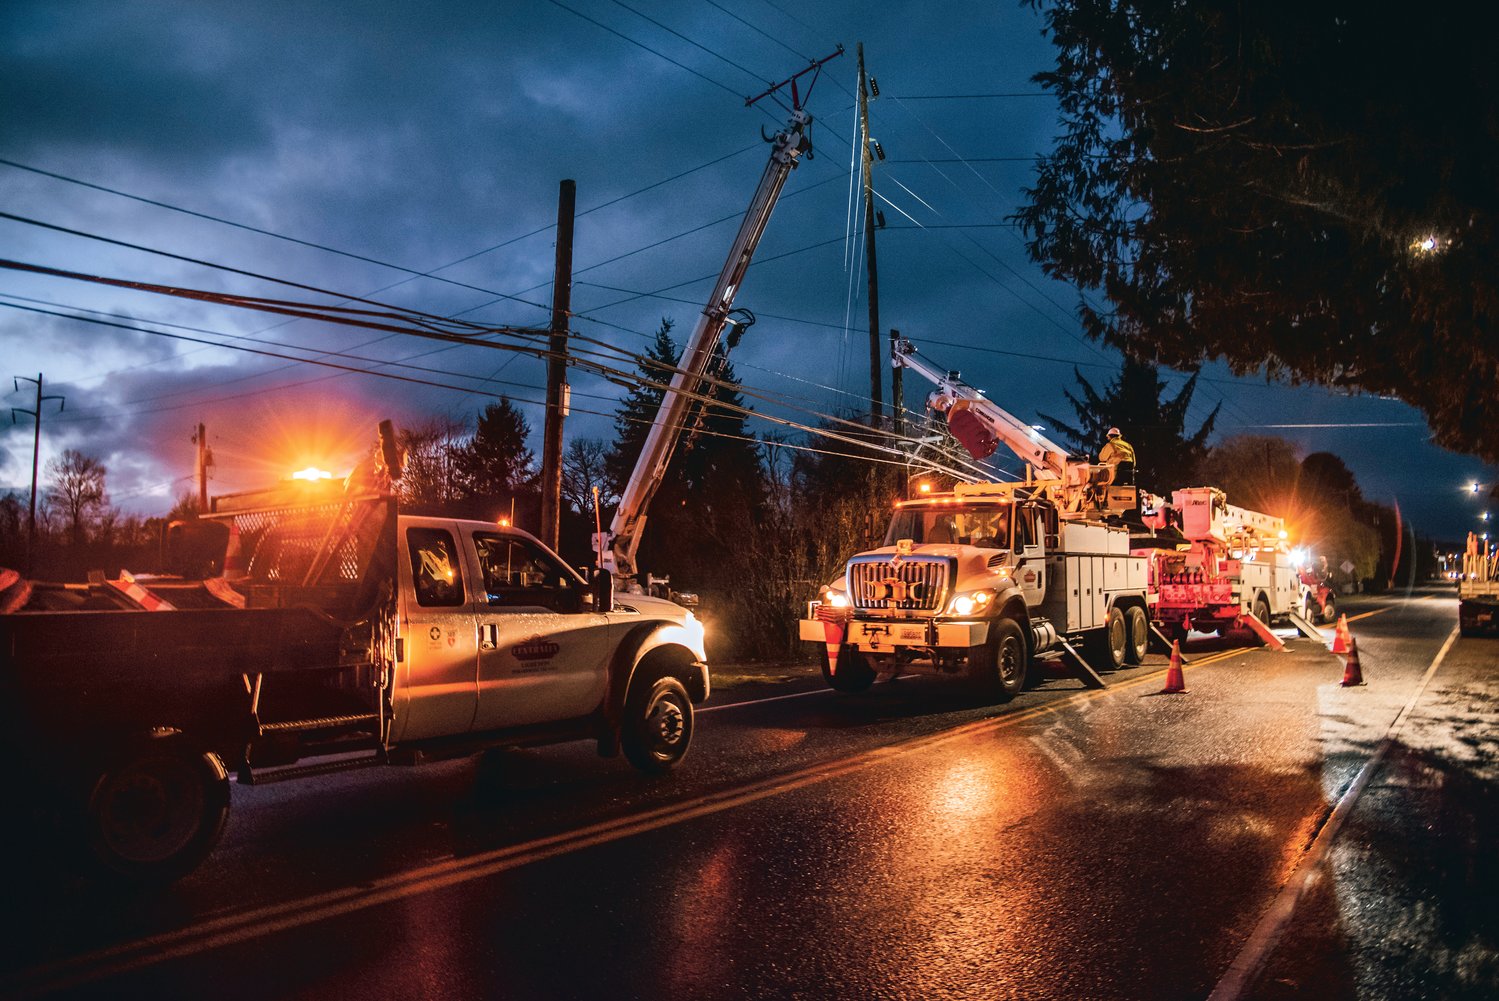 Centralia City Light employees and others work to repair a power pole in the 1500 block of North Pearl Street in Centralia after it was struck by a vehicle.